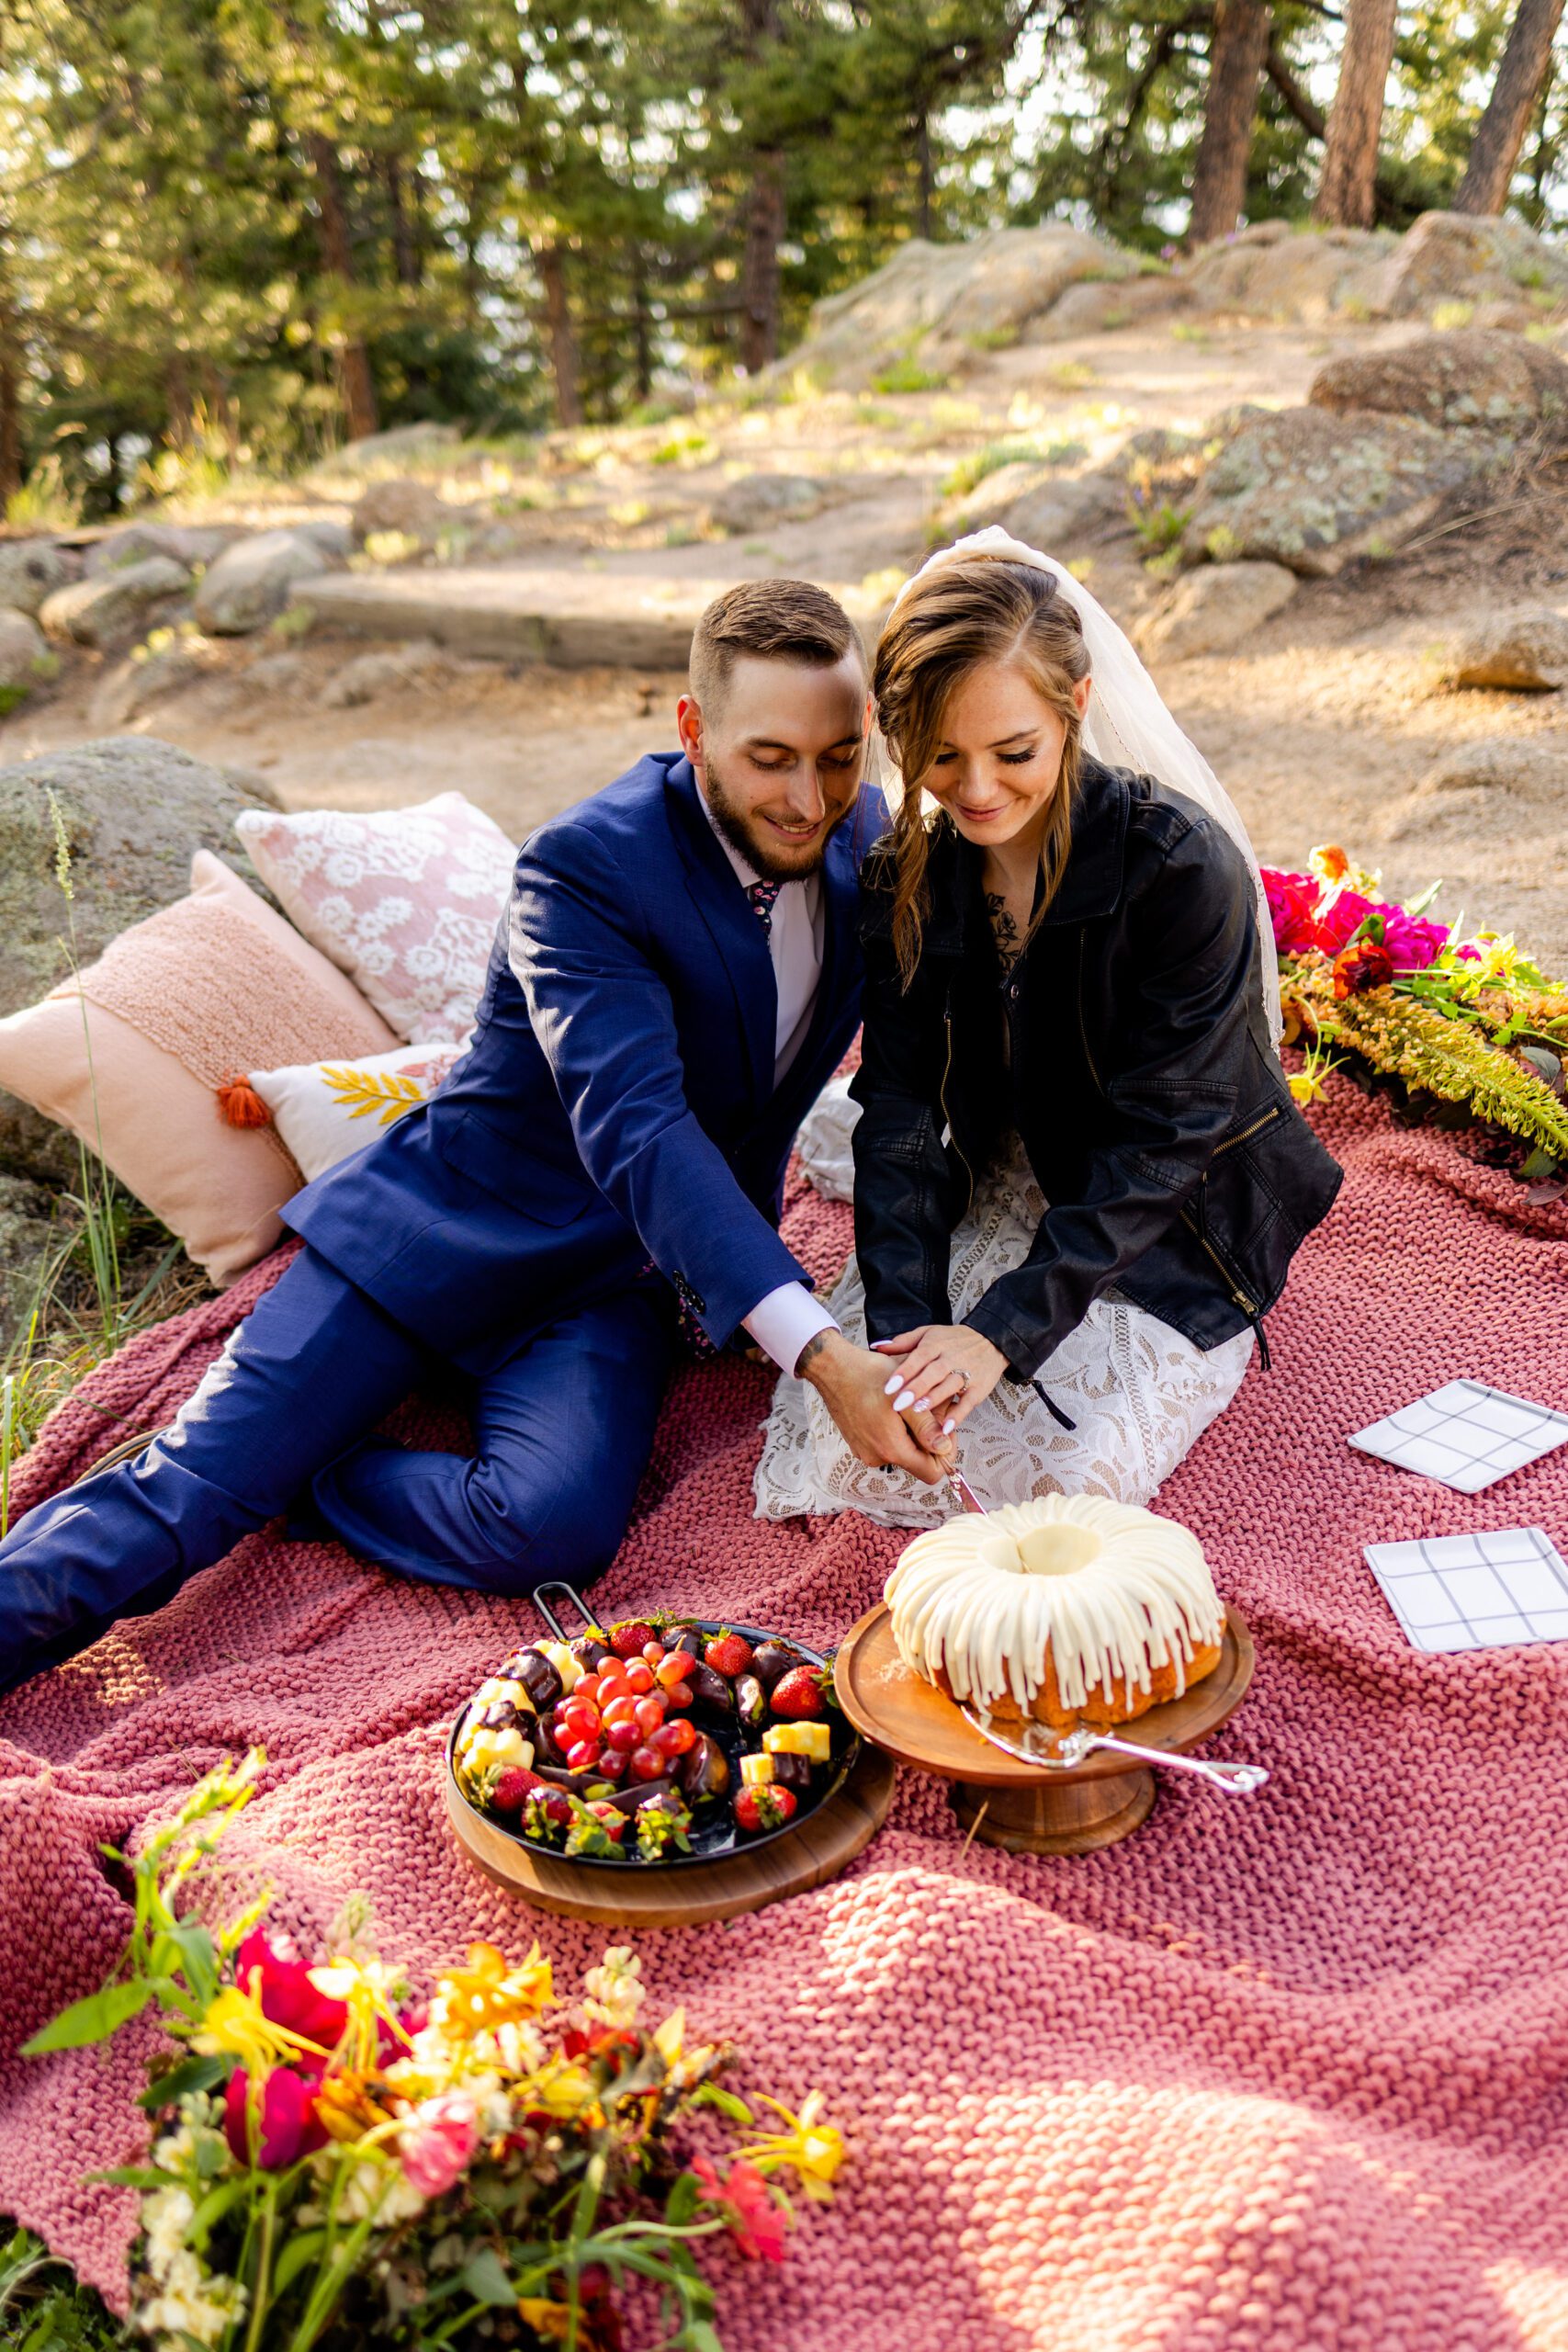 The bride and groom cutting their cake at their picnic at Artist Point after their Sunrise Amphitheater elopement ceremony. 